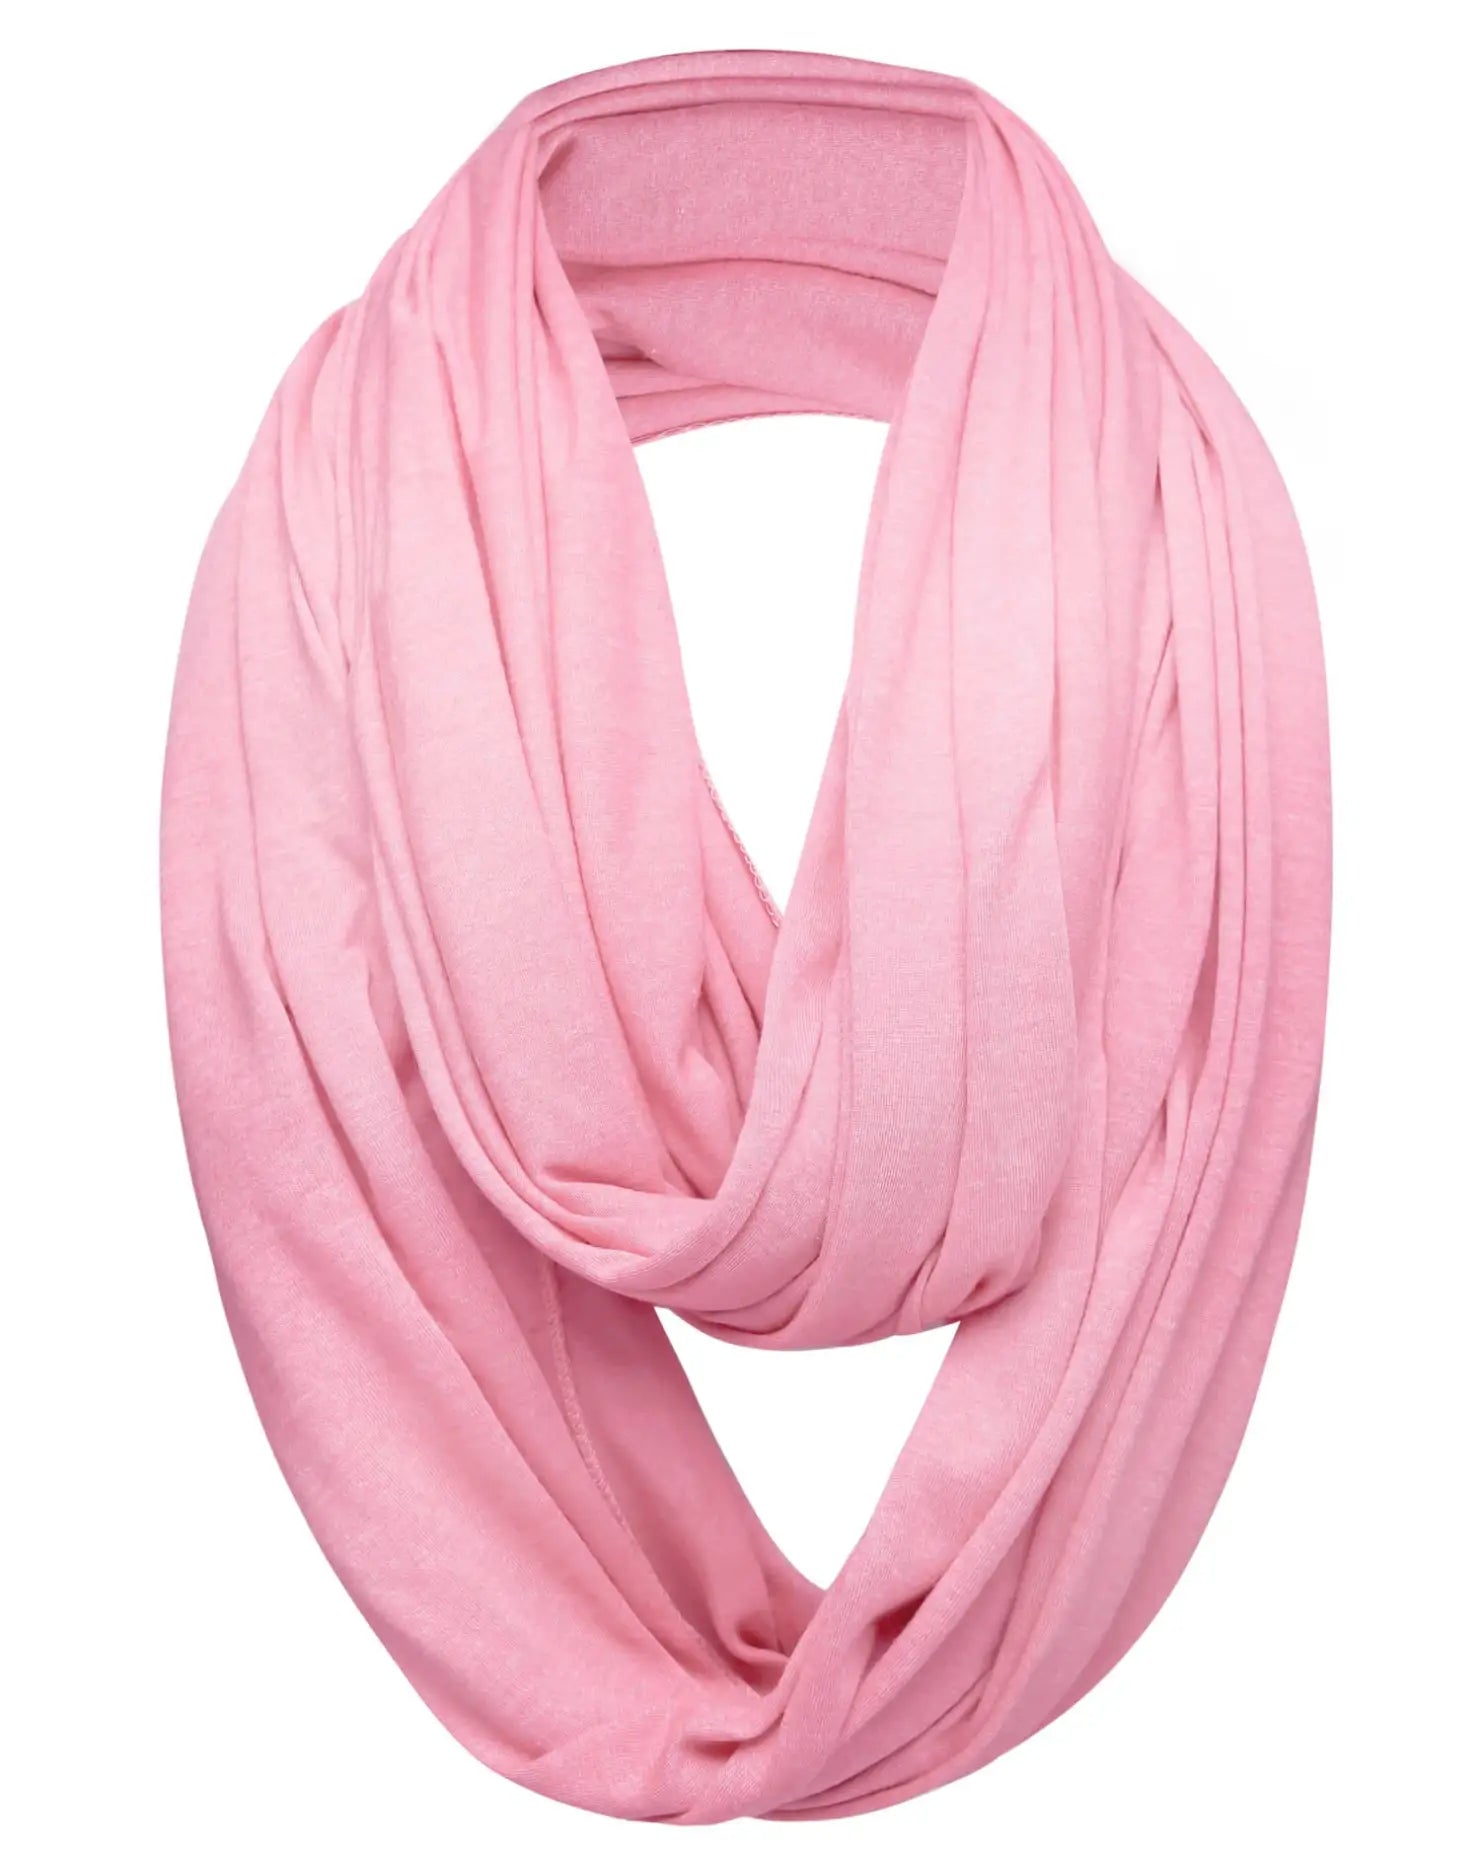 Pink cotton blend jersey winter snood scarf on white background